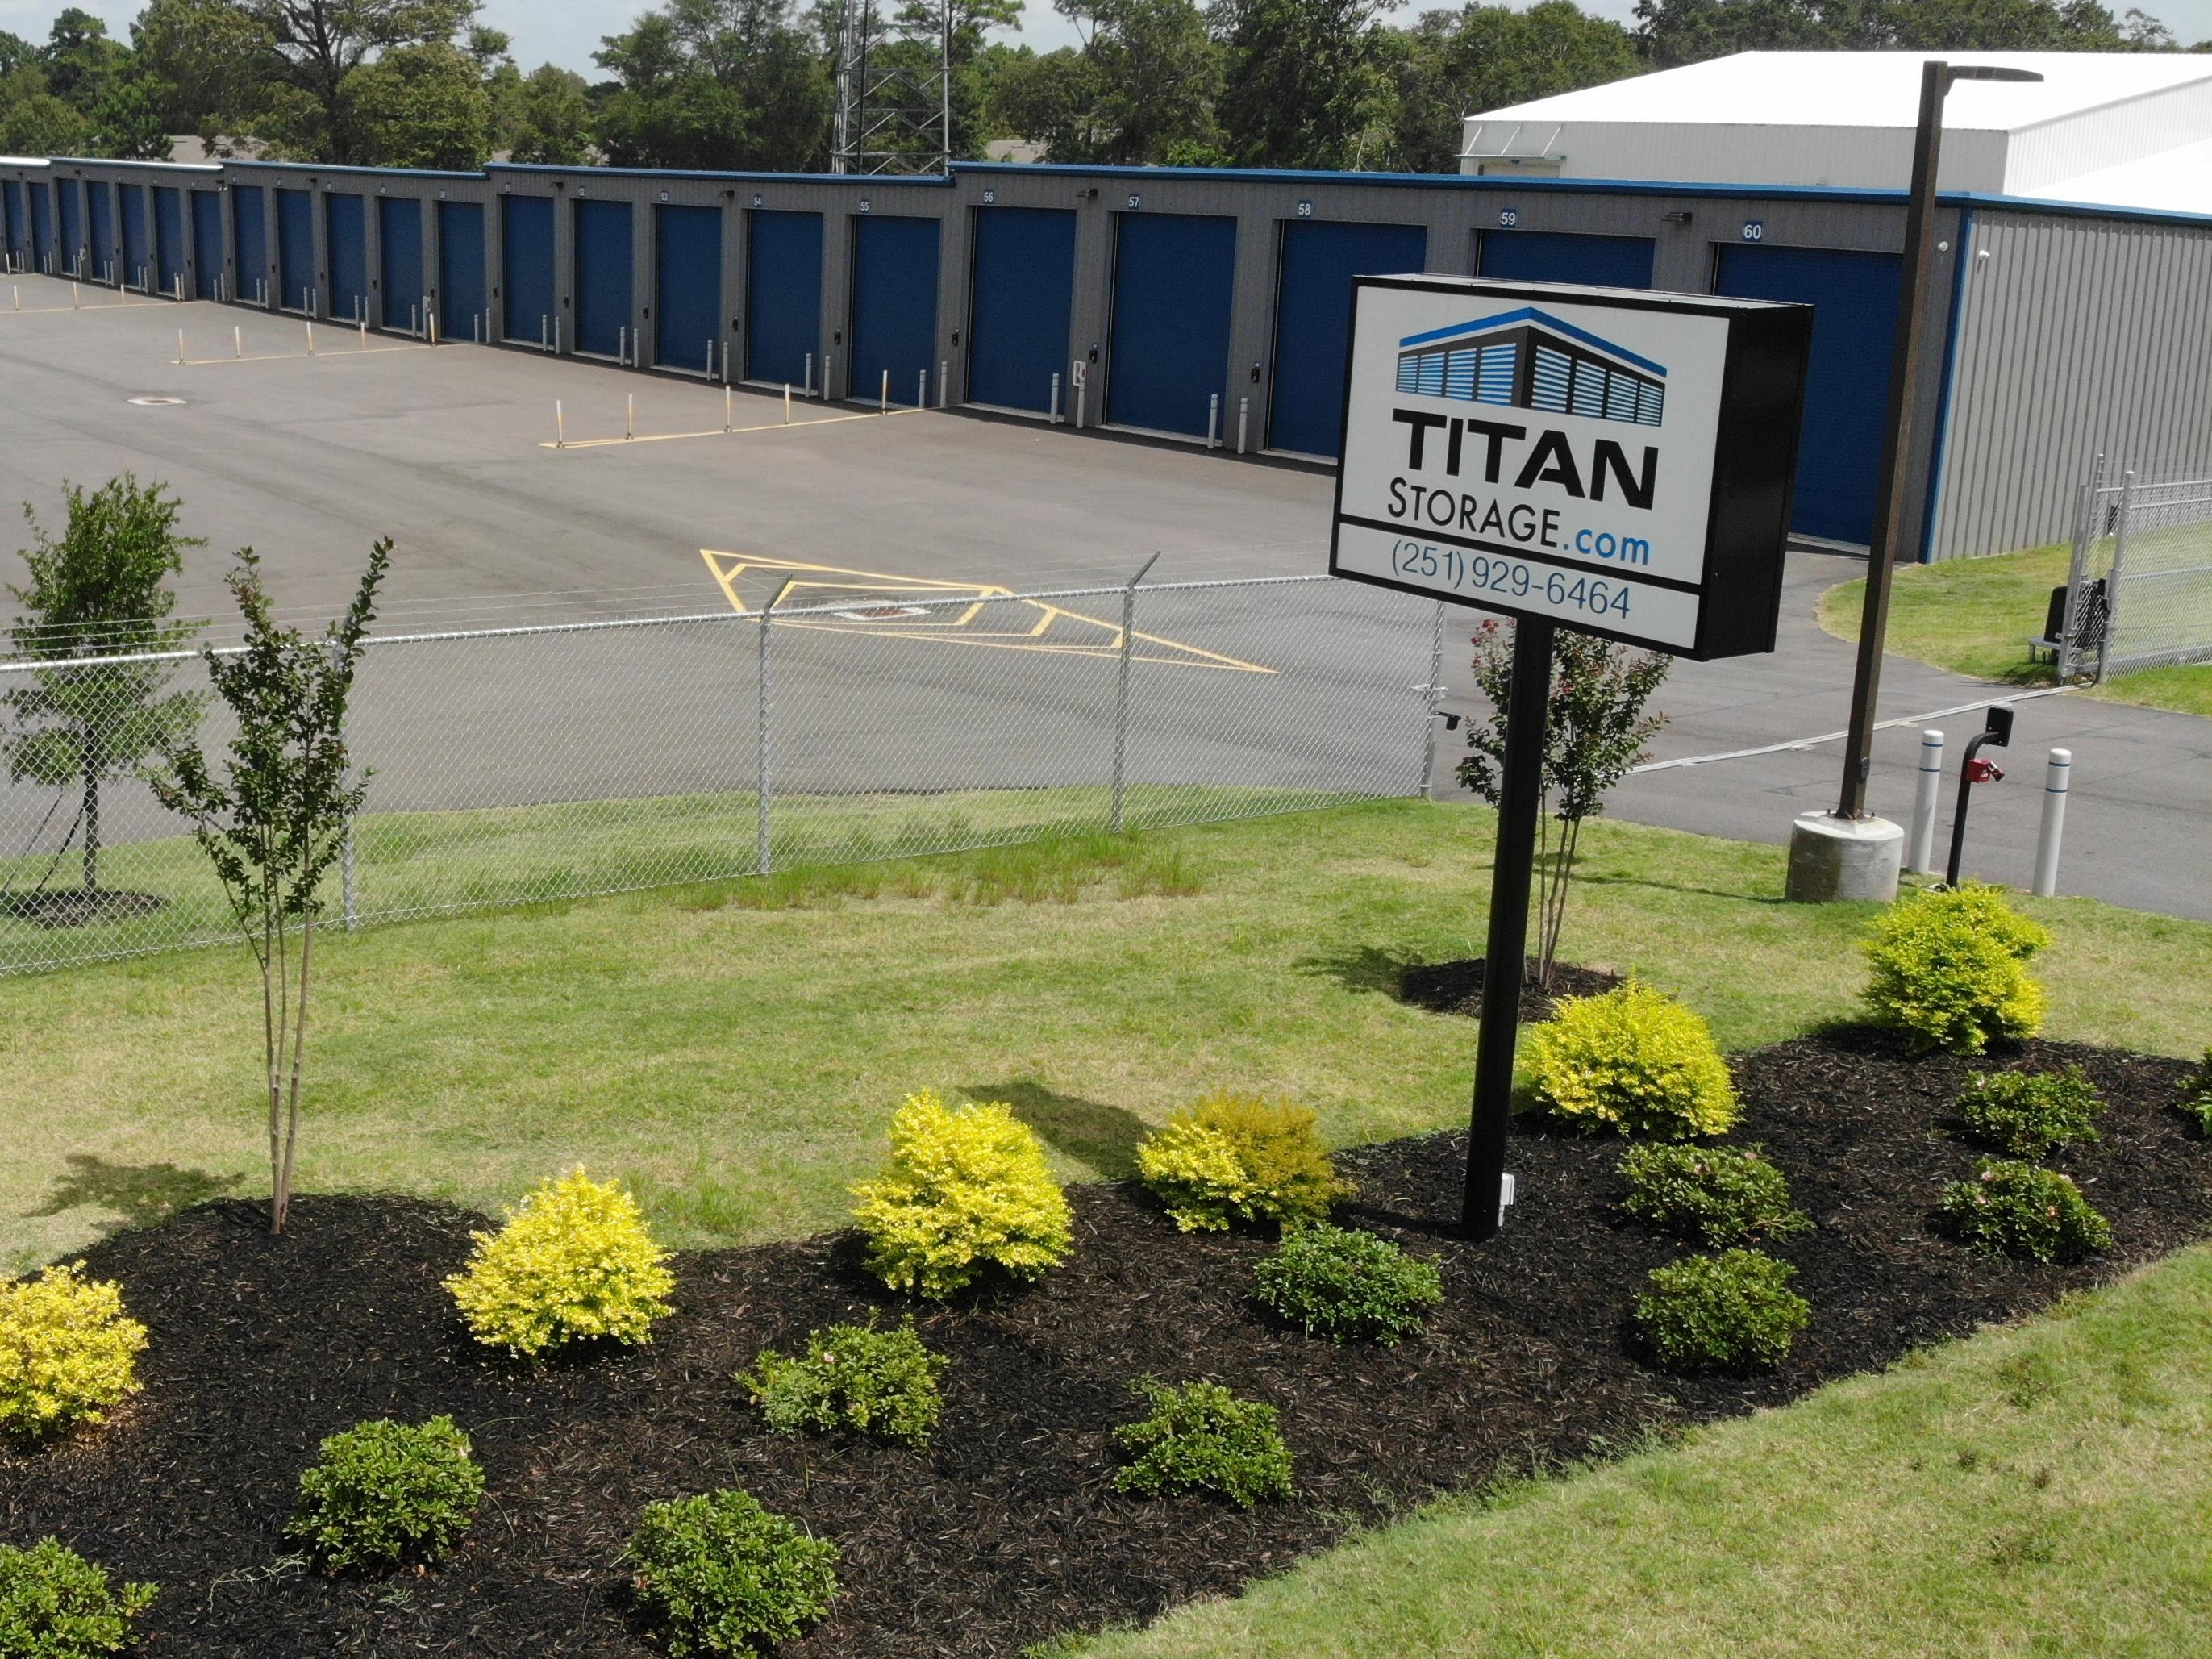 GET IN TOUCH WITH TITAN STORAGE FOR YOUR Daphne, AL SMALL BUSINESS STORAGE UNIT SOLUTION